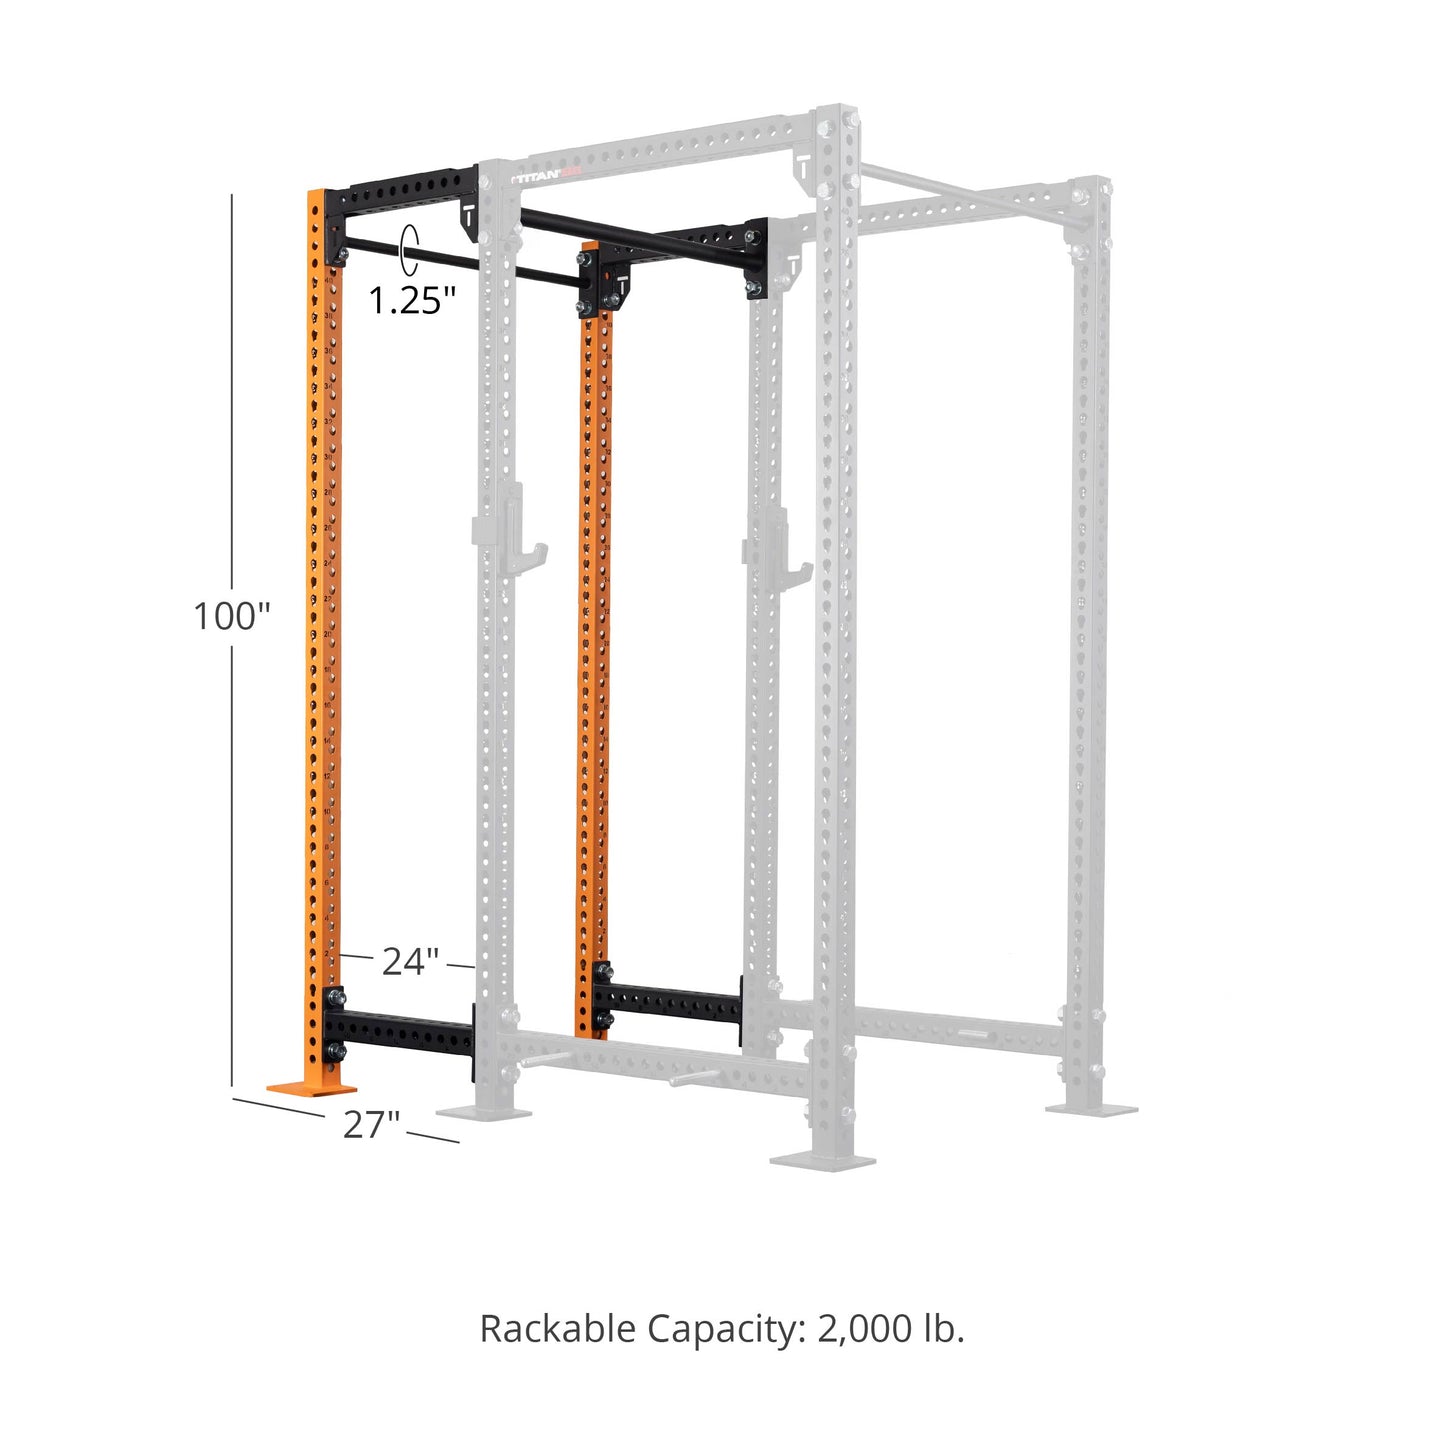 TITAN Series 24" Extension Kit - Extension Color: Orange - Extension Height: 100" - Crossmember: 1.25" Pull-Up Bar | Orange / 100" / 1.25" Pull-Up Bar - view 109